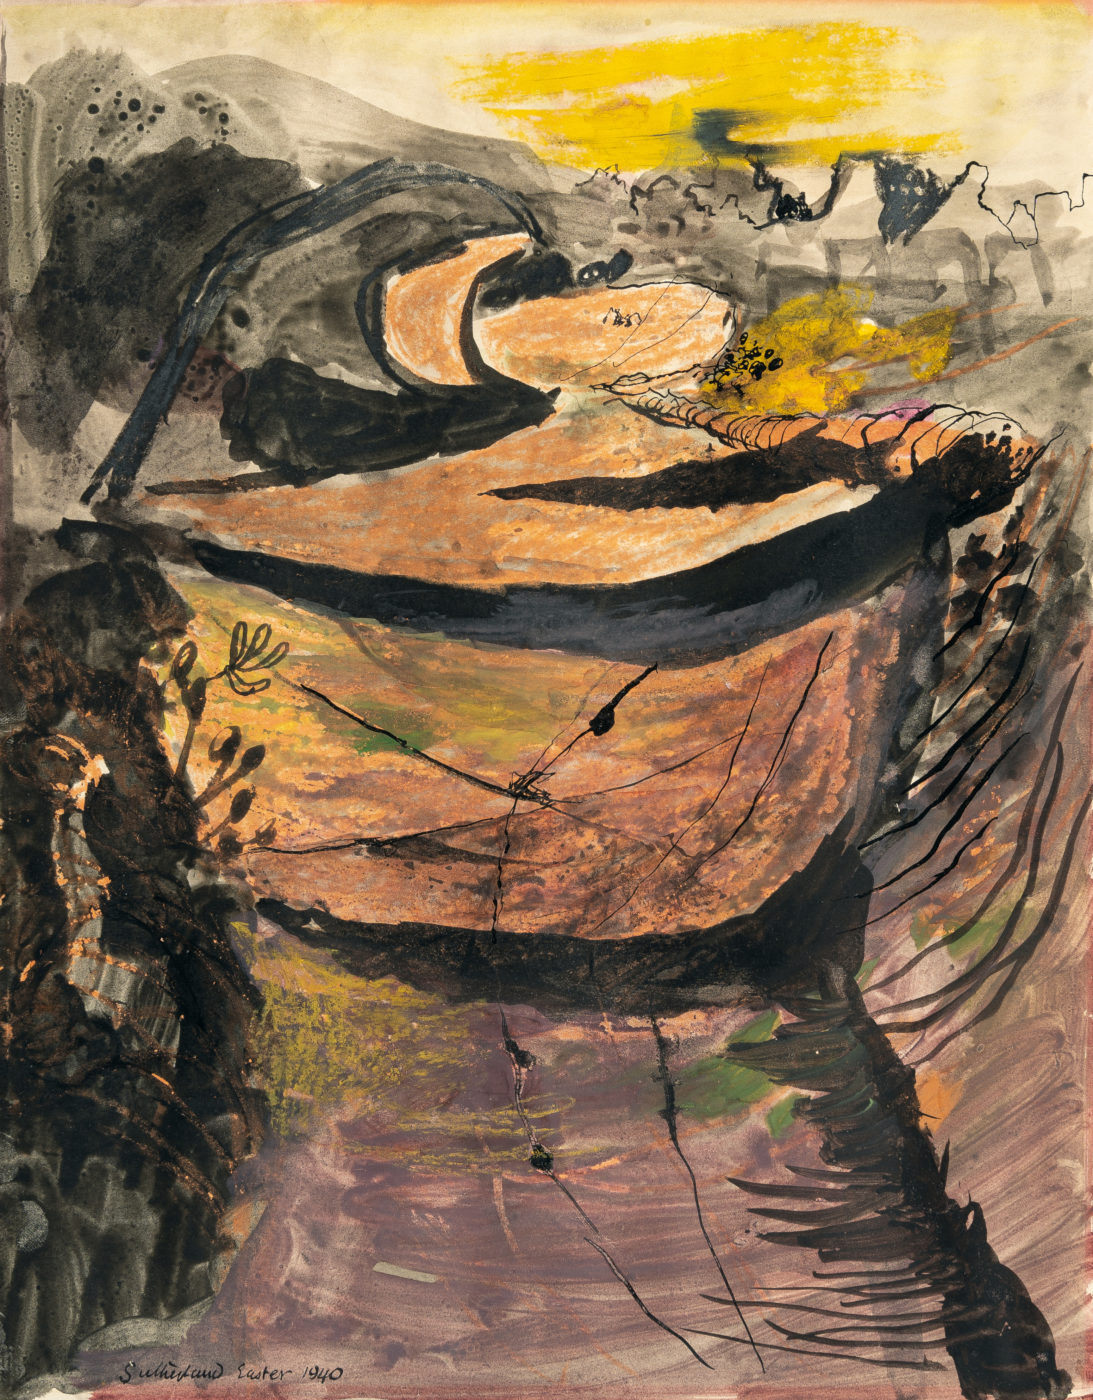 Graham Sutherland, OM (1903-1980), A Mountain Road